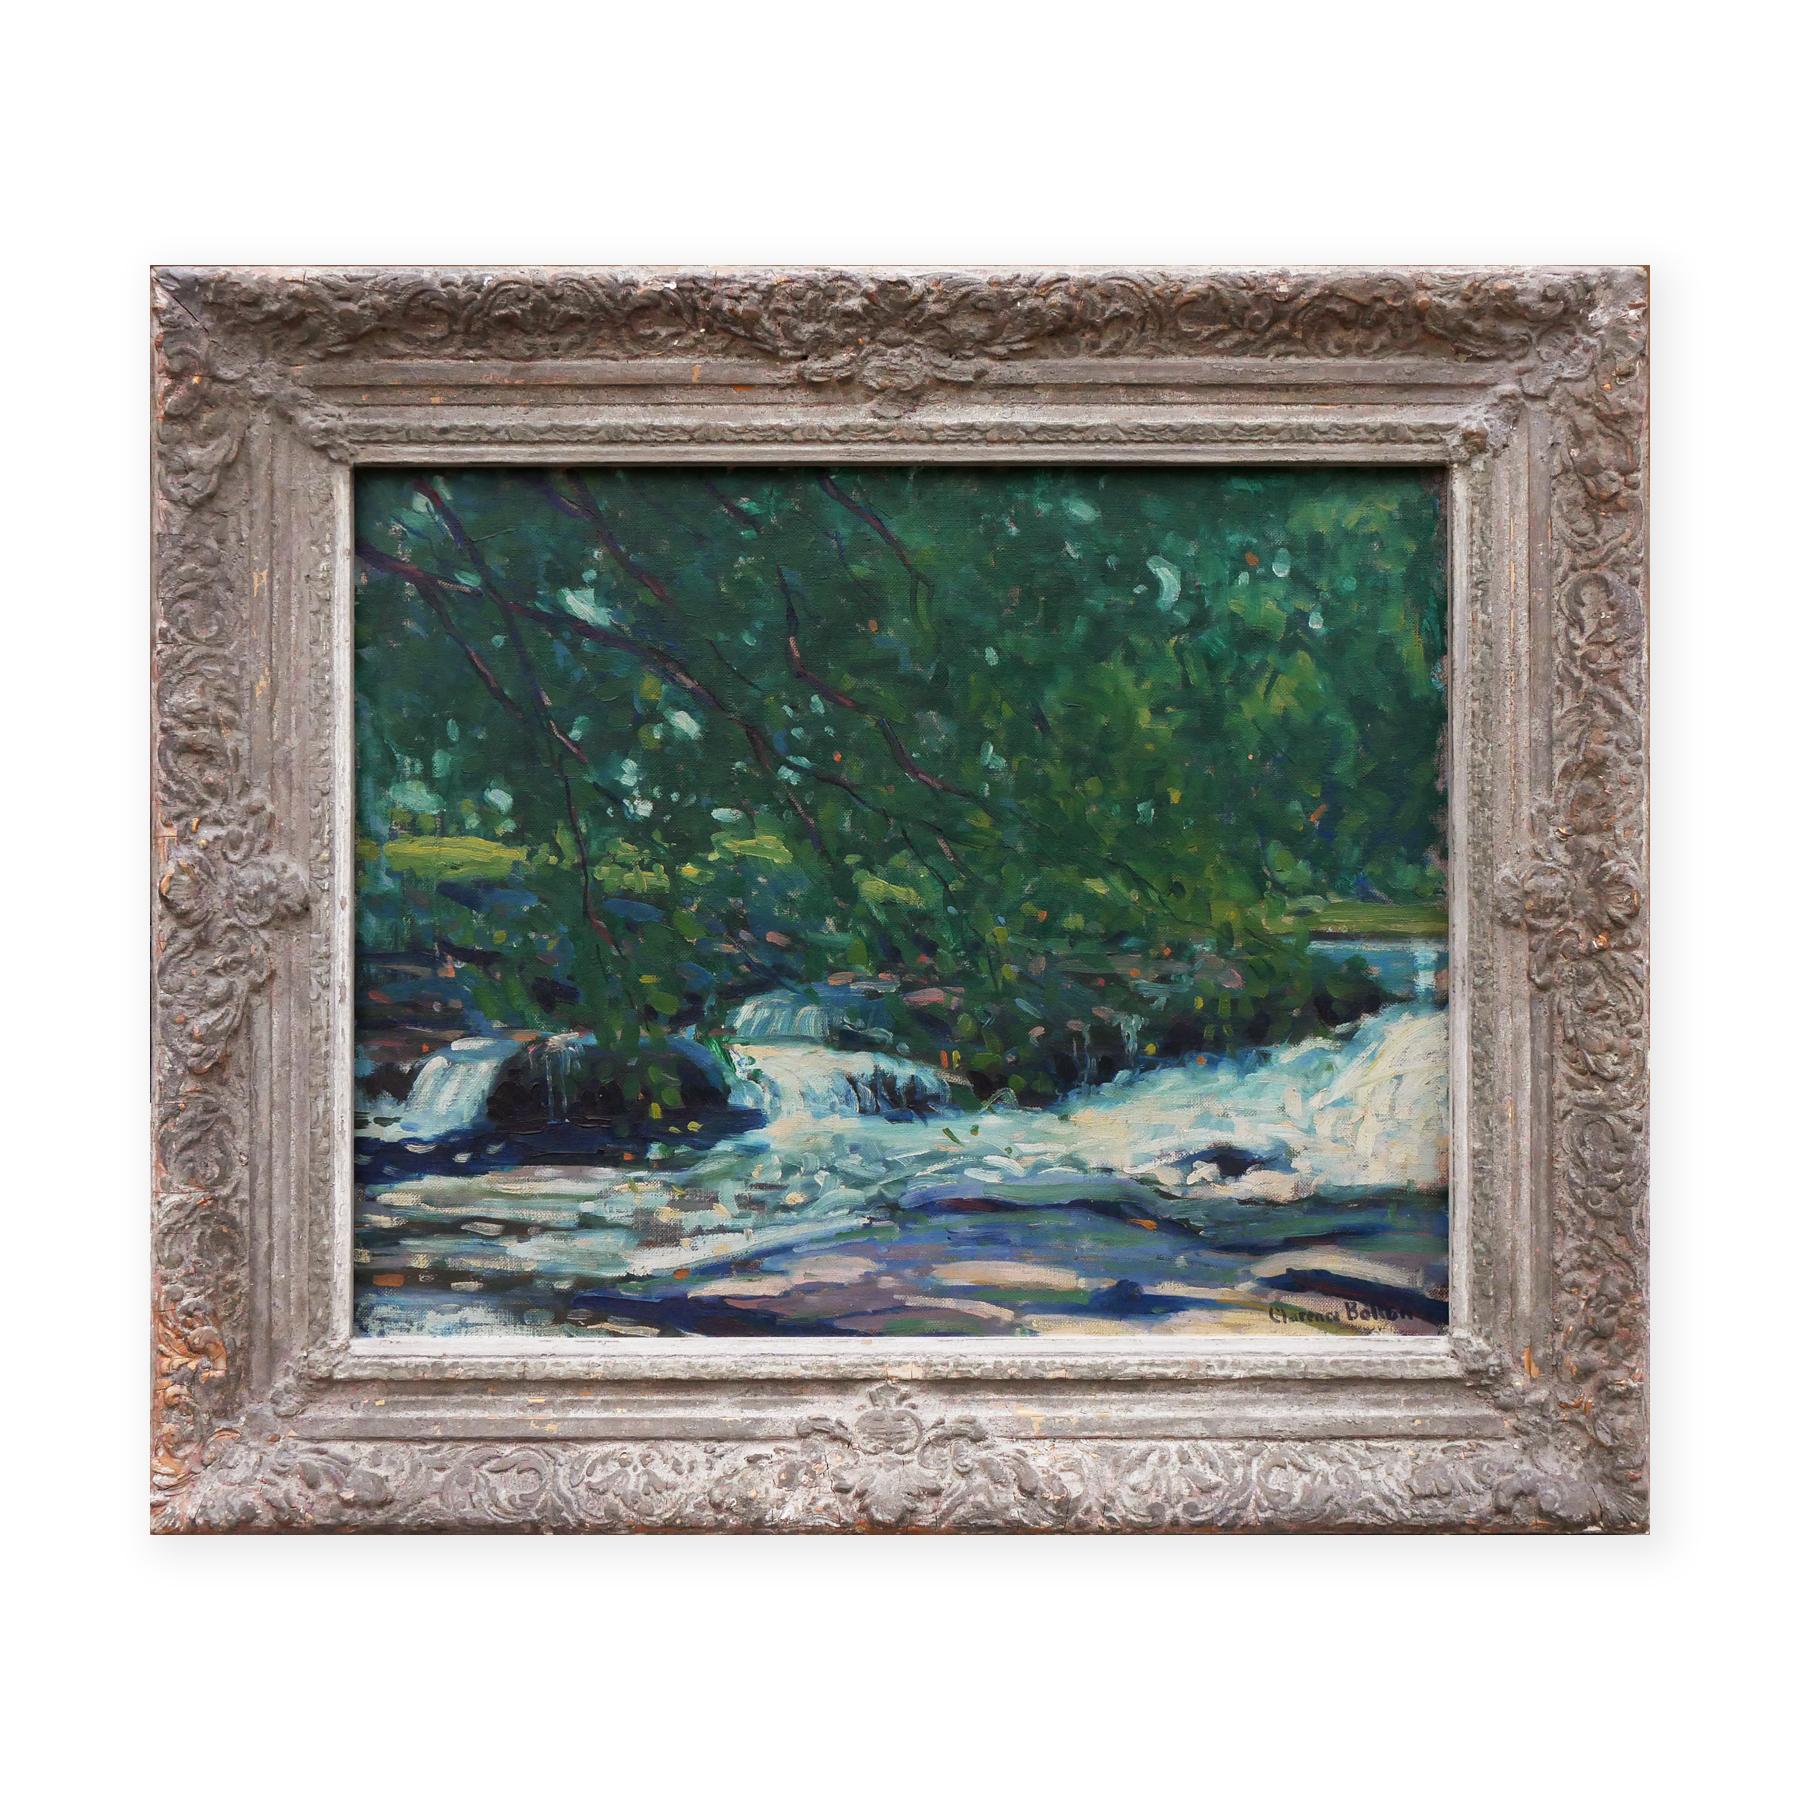 Green and blue abstract impressionist waterscape by artist Clarence Bolton. The piece depicts a brook with clear, flowing water. The piece is signed by the artist at the bottom right. Framed in a beautifully carved frame.

Dimensions Without Frame: